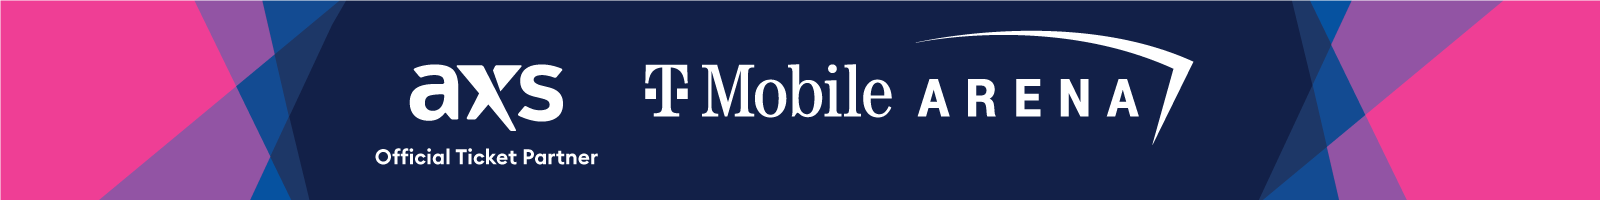 More Info for T-Mobile_web-banner_1600x200.png